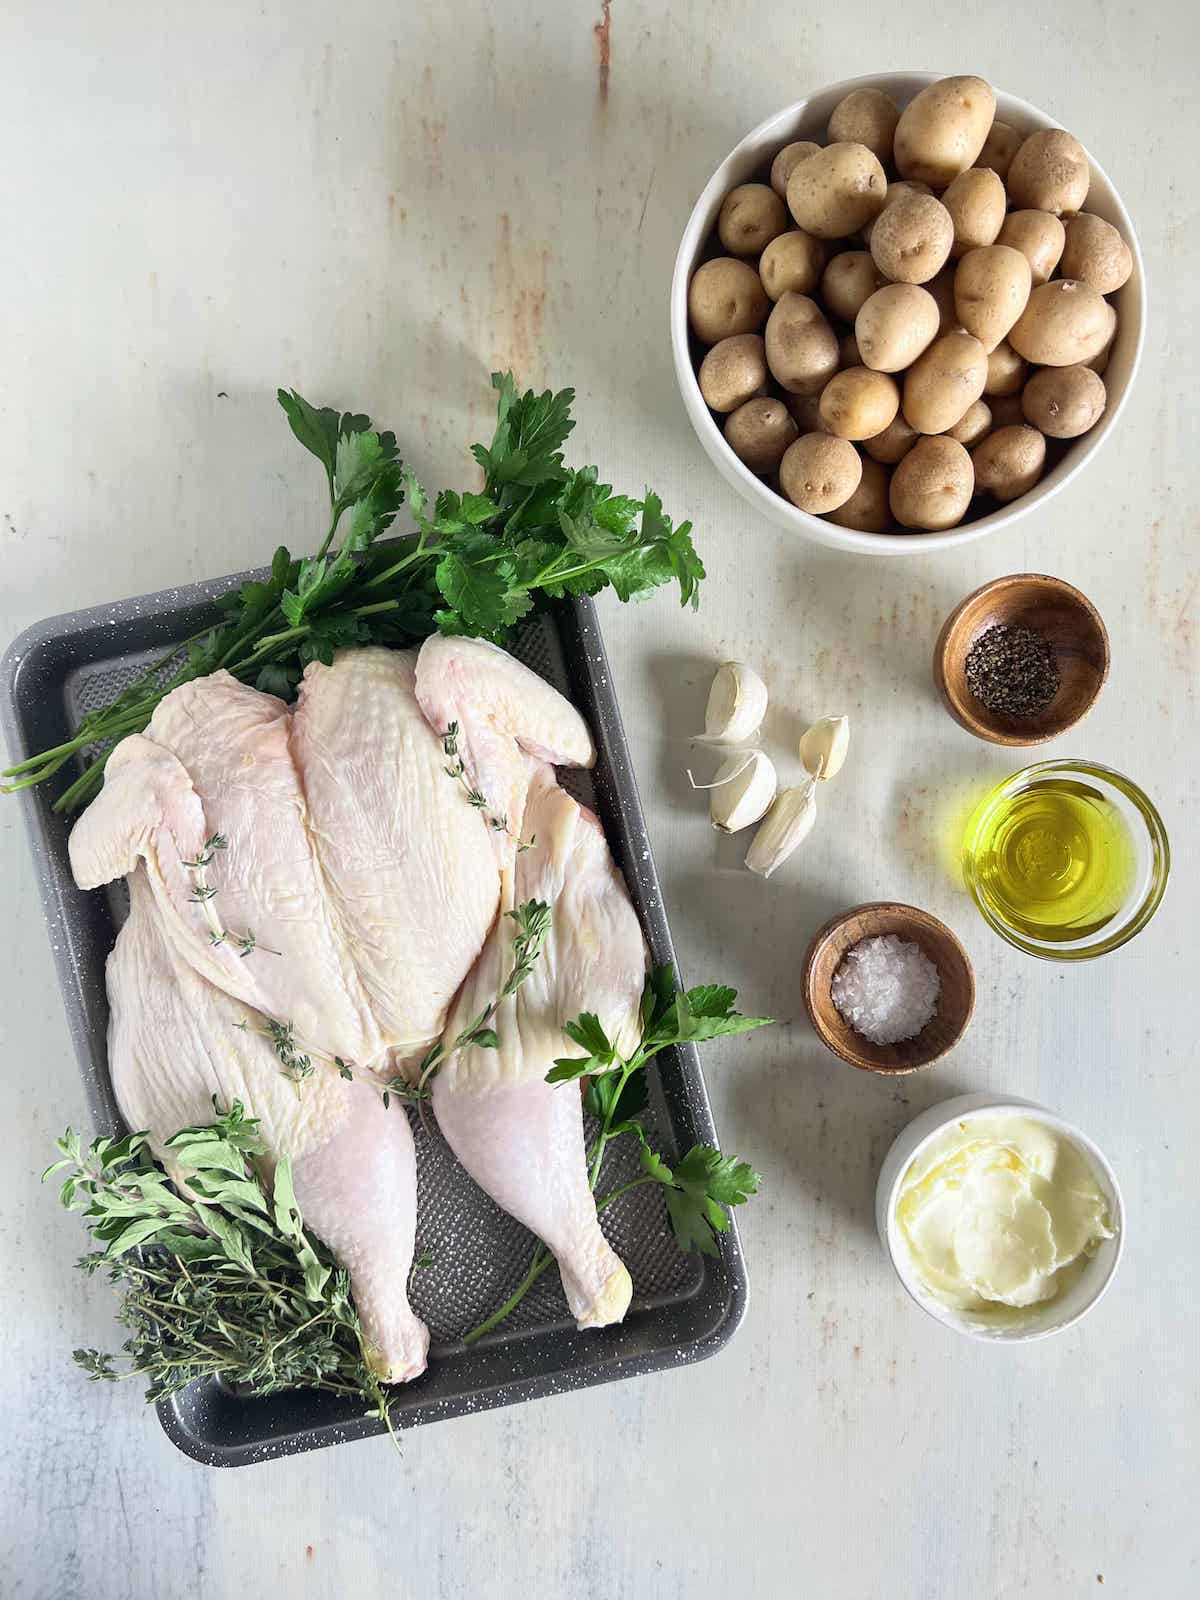 Ingredients for whole roast chicken and potatoes. Whole raw chicken on a tray with fresh herbs, white bowl of baby potatoes, garlic cloves, salt, pepper, oil and butter in little bowls.